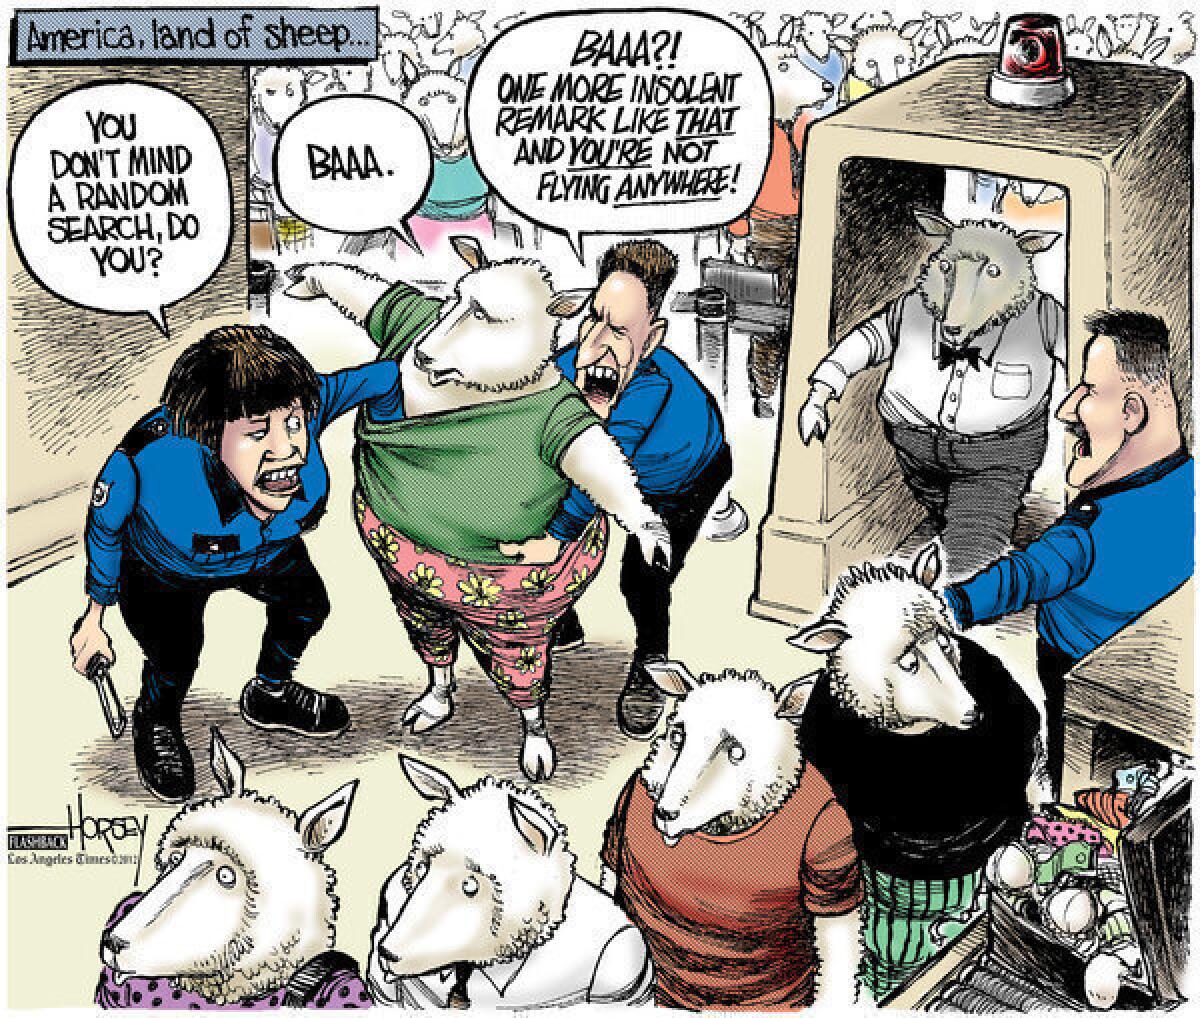 This Horsey cartoon from 2003 is a reminder of the bad old days of airport security.